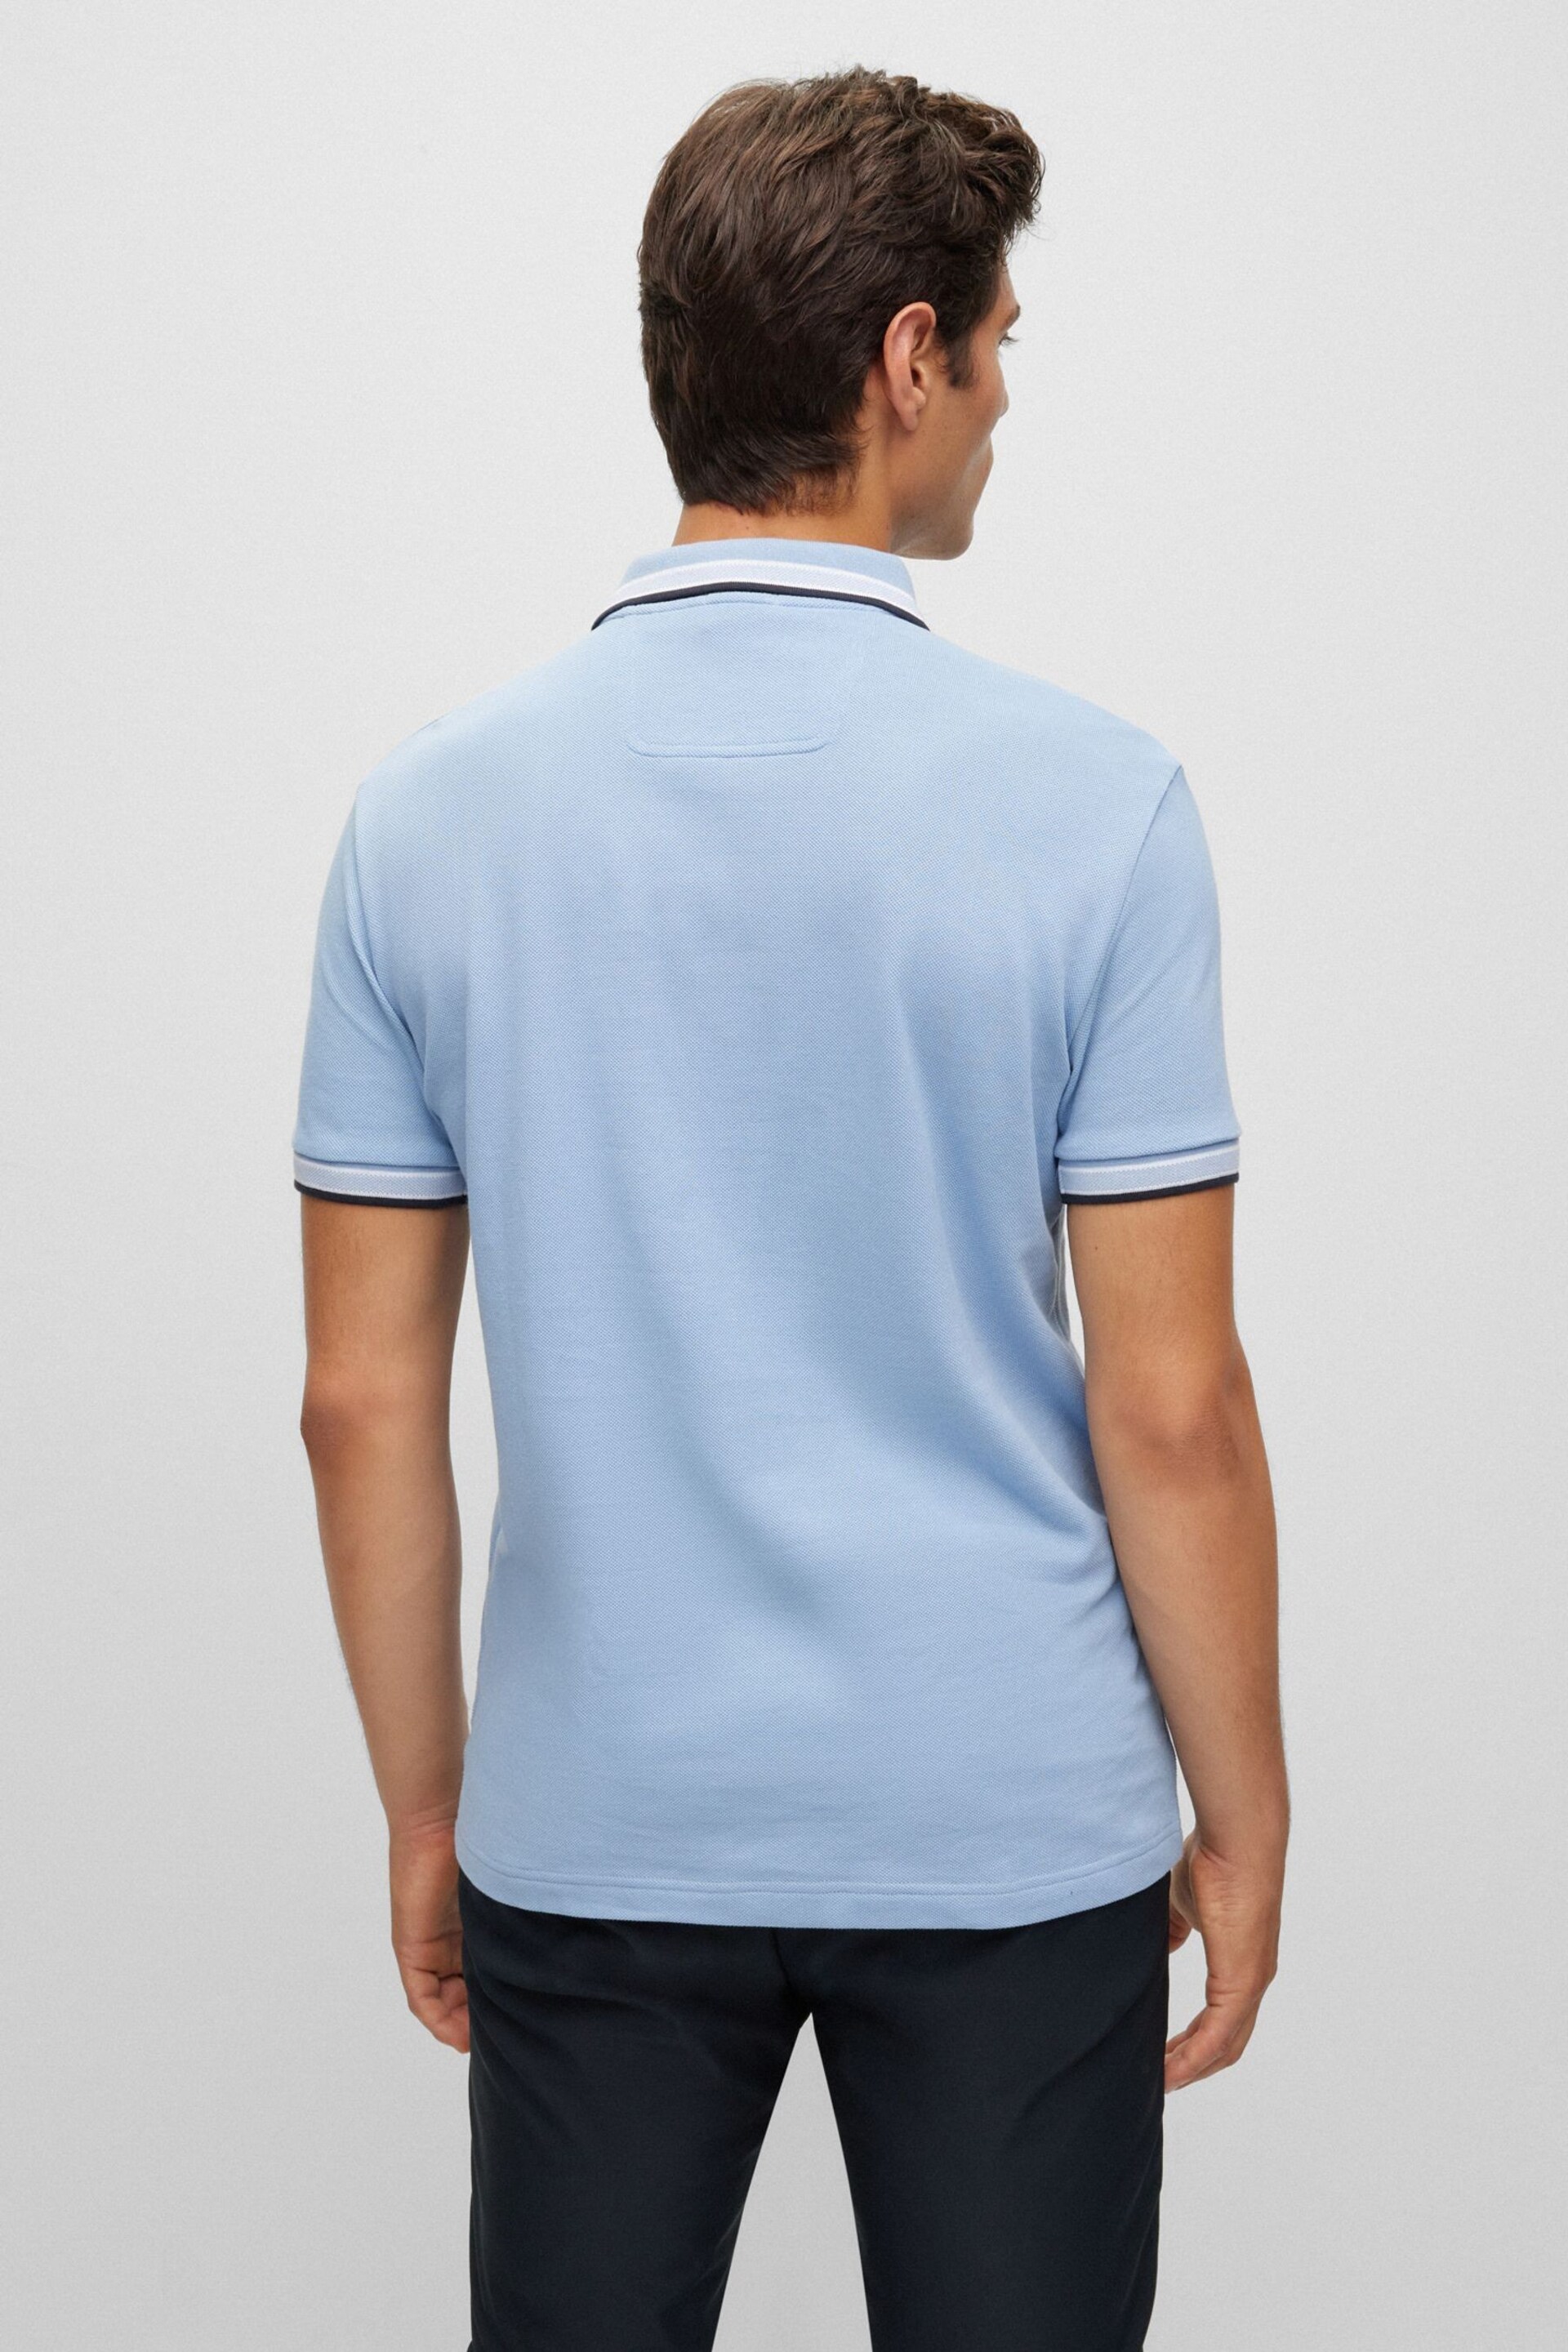 BOSS Sky Blue/Black Tipping Paddy Polo Shirt - Image 2 of 5